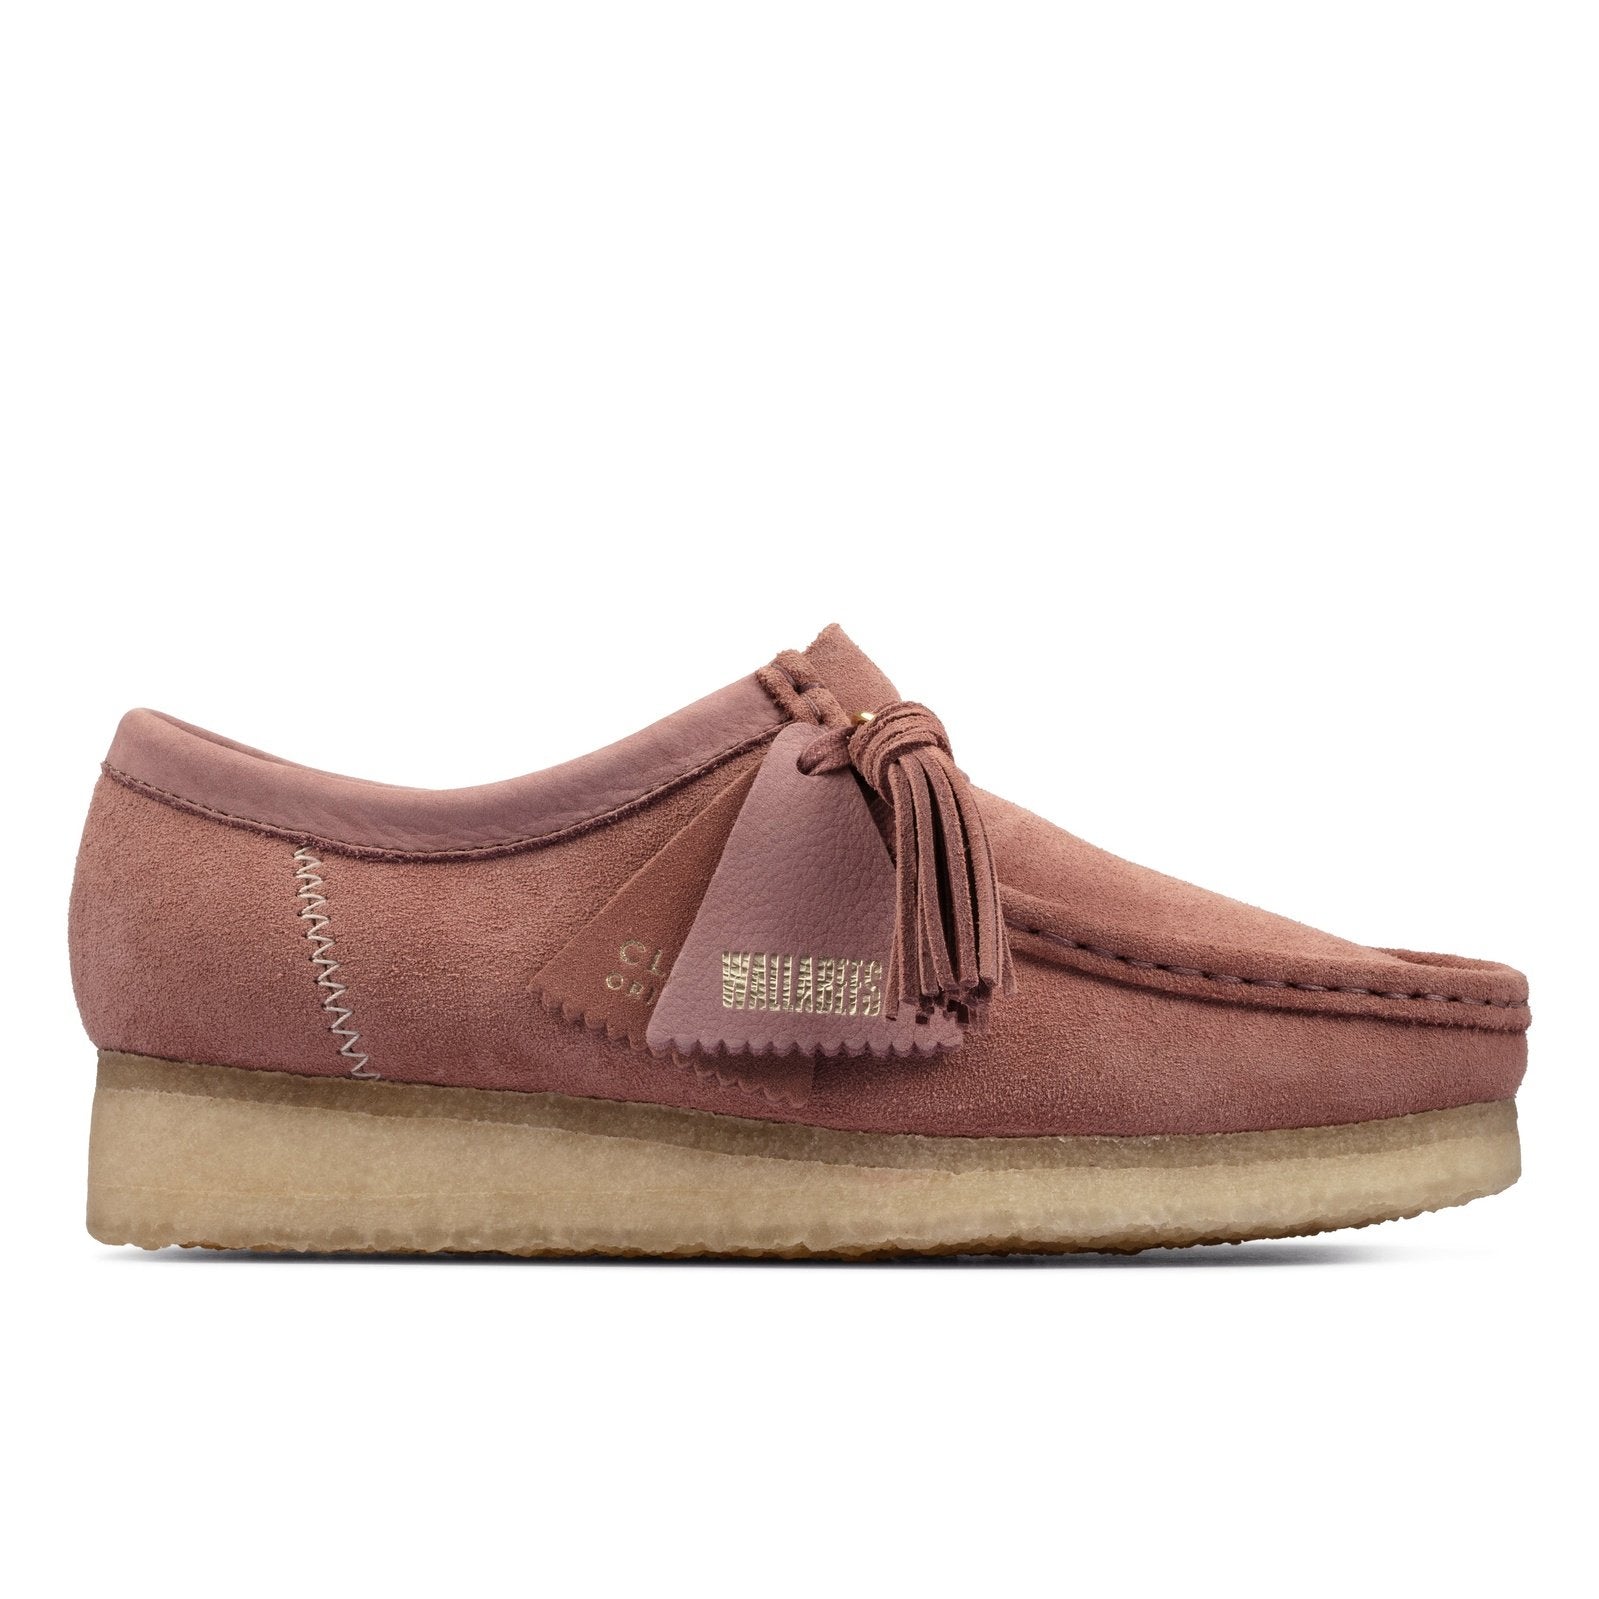 Clarks Shoes Wallabee Dusty Pink Suede – THE CLARKS STORE